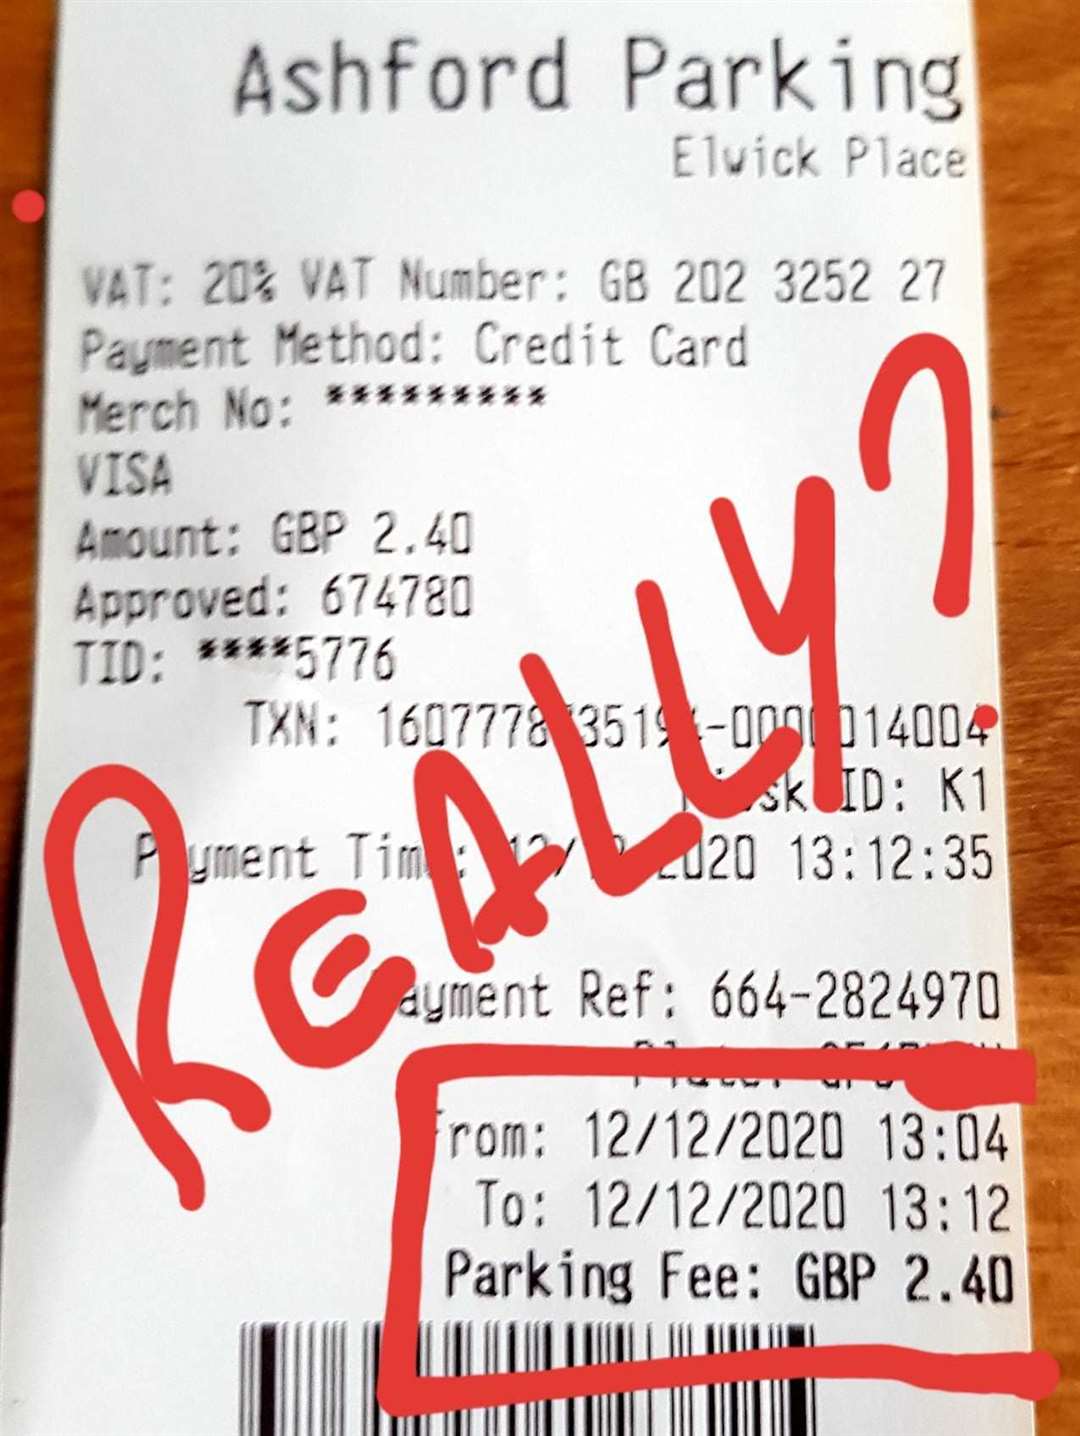 Ian Rampton took this picture of the receipt after being charged £2.40 for eight minutes of parking on Saturday, December 12